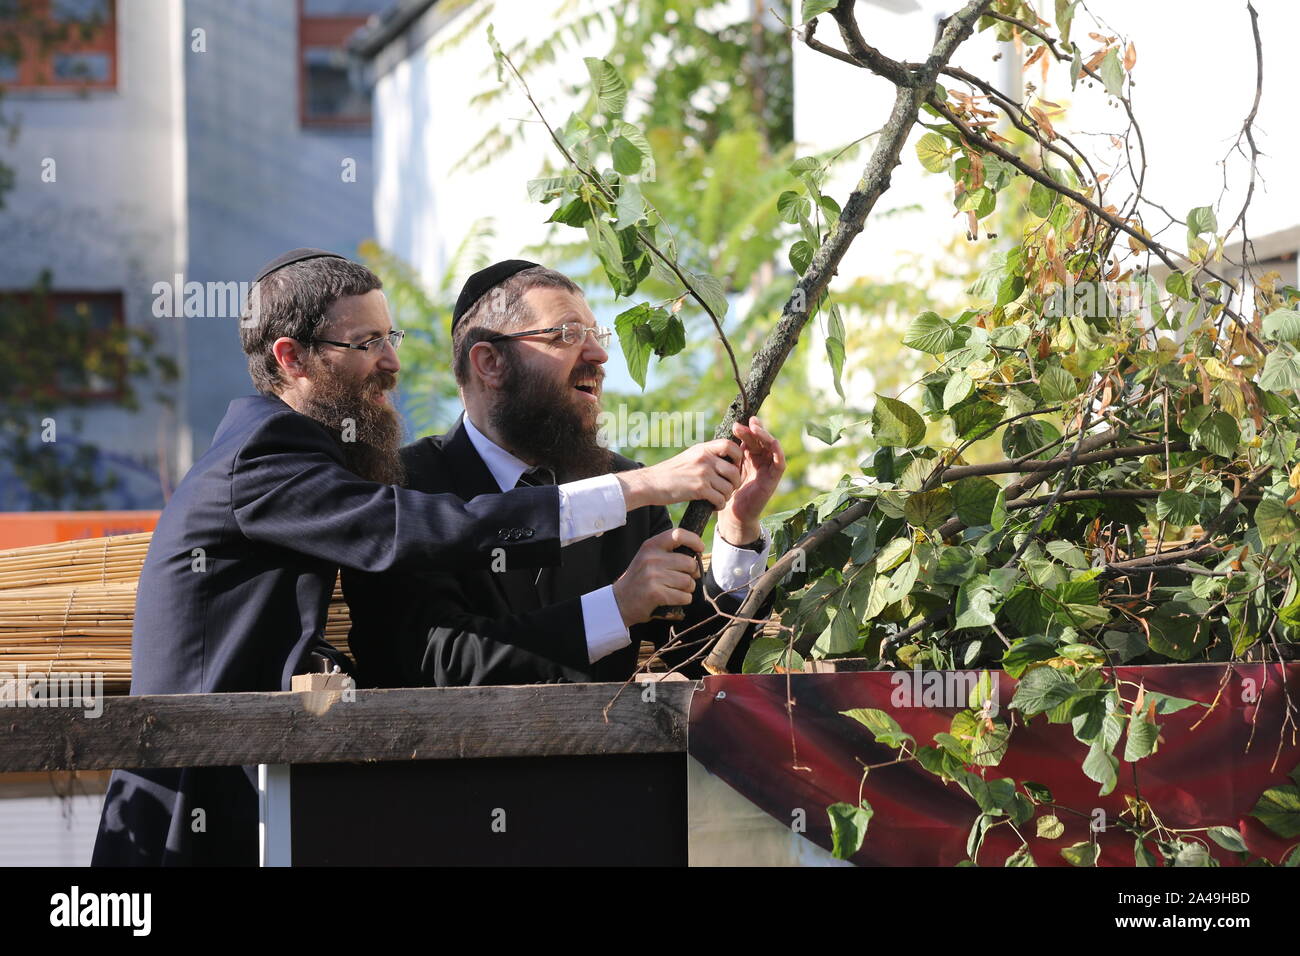 Germany, Berlin, 13.10.2019, Samuel Segal and Yehuda Teichtal at the inauguration of the Sukka. On Sunday, October 13, 2019, begins Sukkot, the Jewish Feast of Tabernacles. The seven-day festival is on the grounds of the Jewish Education Center Berlin. For the duration of the Sukkot holidays, all meals are taken together in the sukkah (tabernacle). Stock Photo